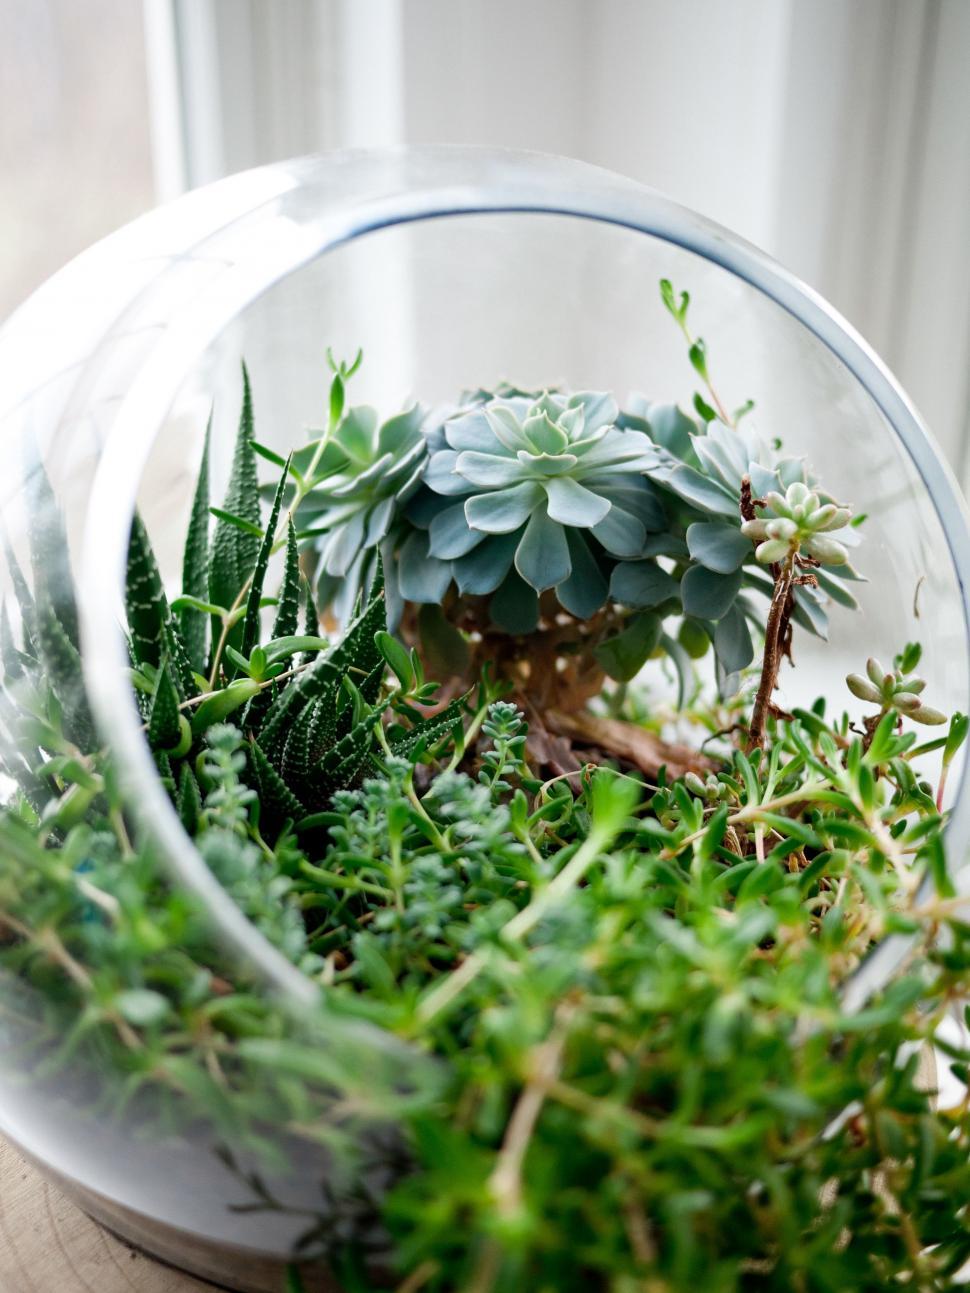 Free Image of Glass Bowl Filled With Plants on Wooden Table 